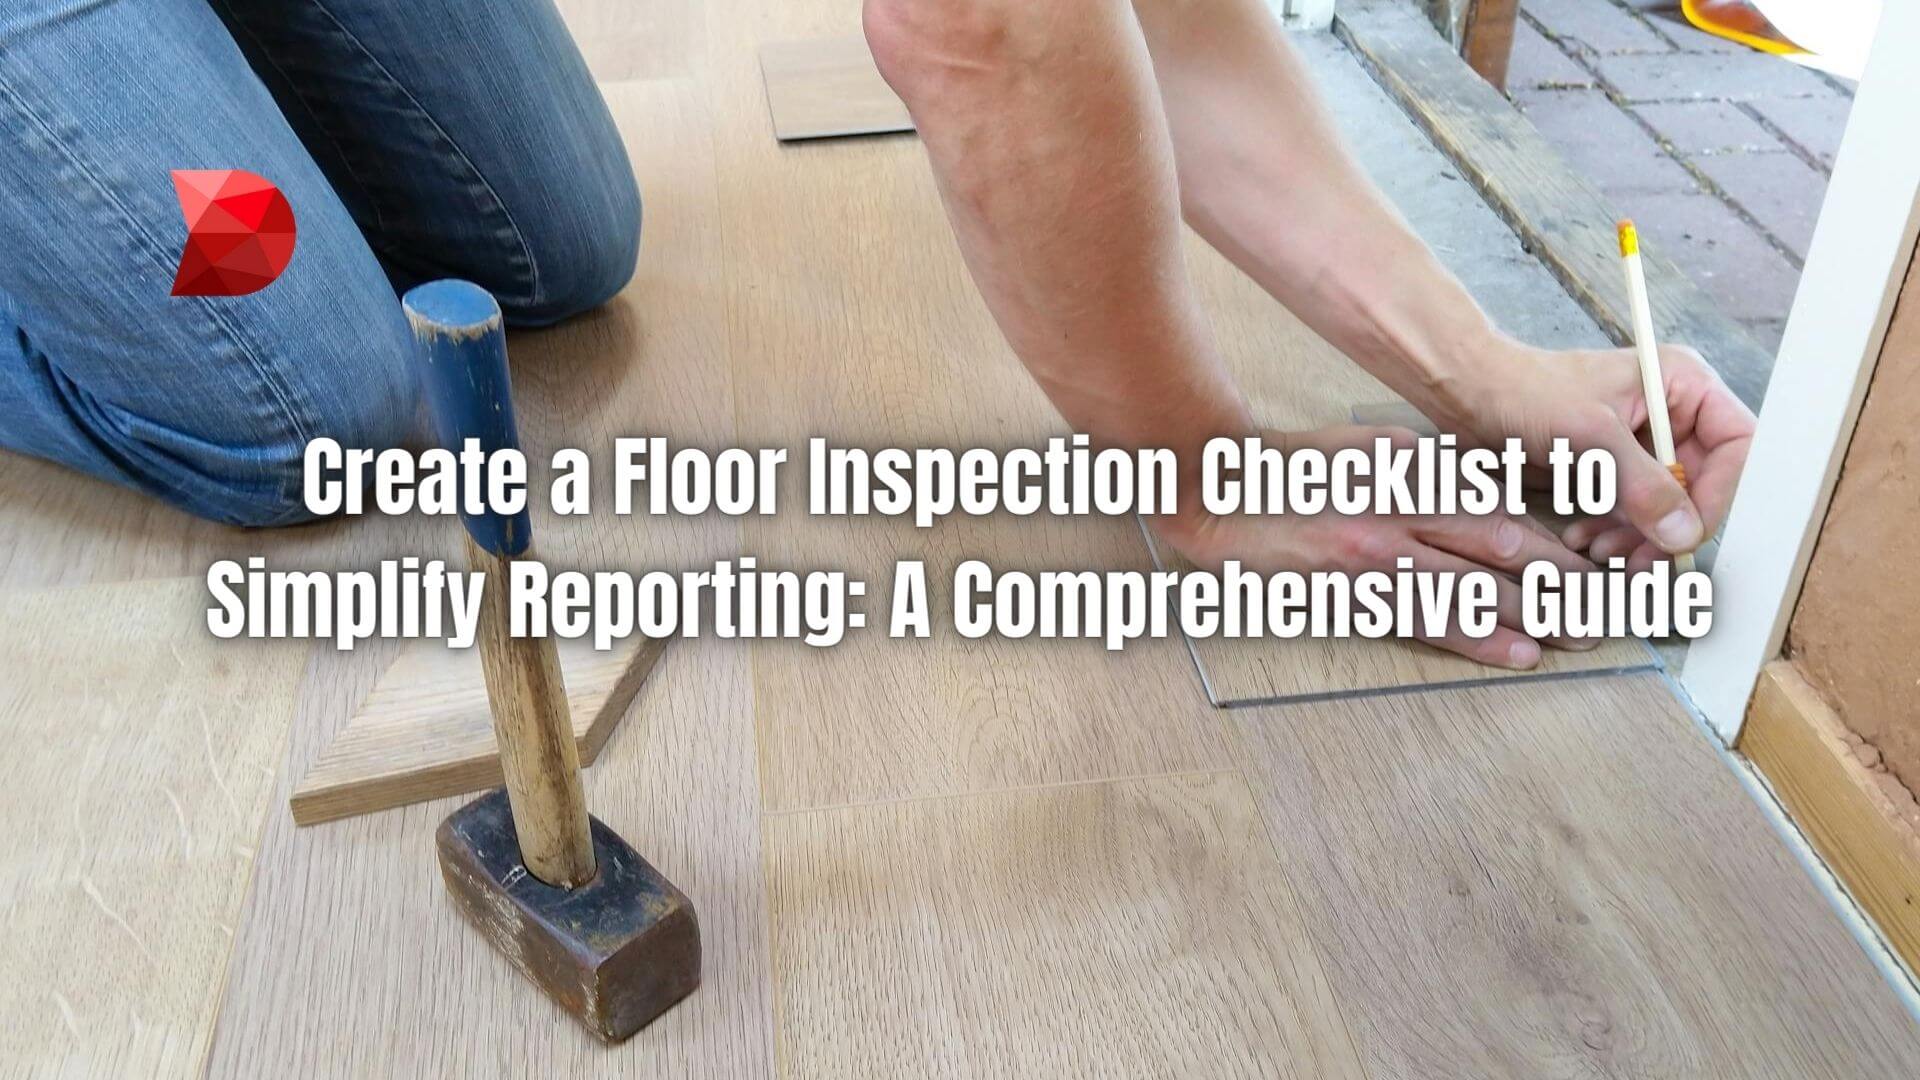 Simplify floor inspection reporting with our expert guide! Click here to learn how to create a checklist that enhances assessment precision.